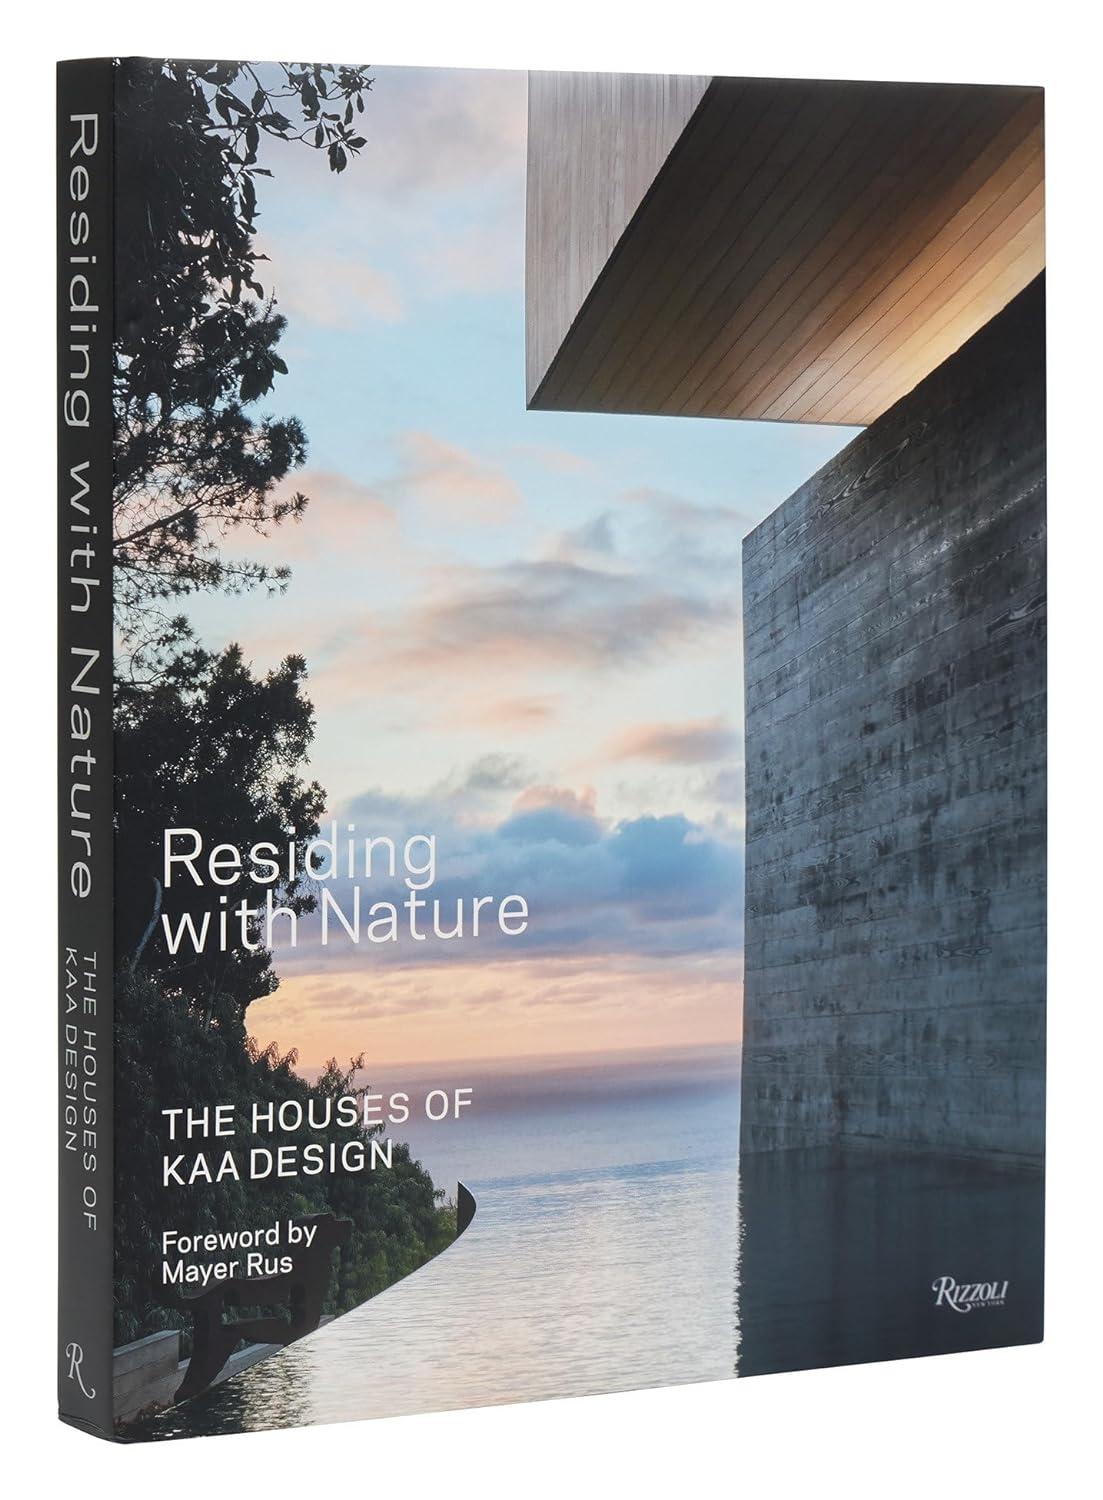 RESIDING WITH NATURE: THE HOUSES OF KAA DESIGN